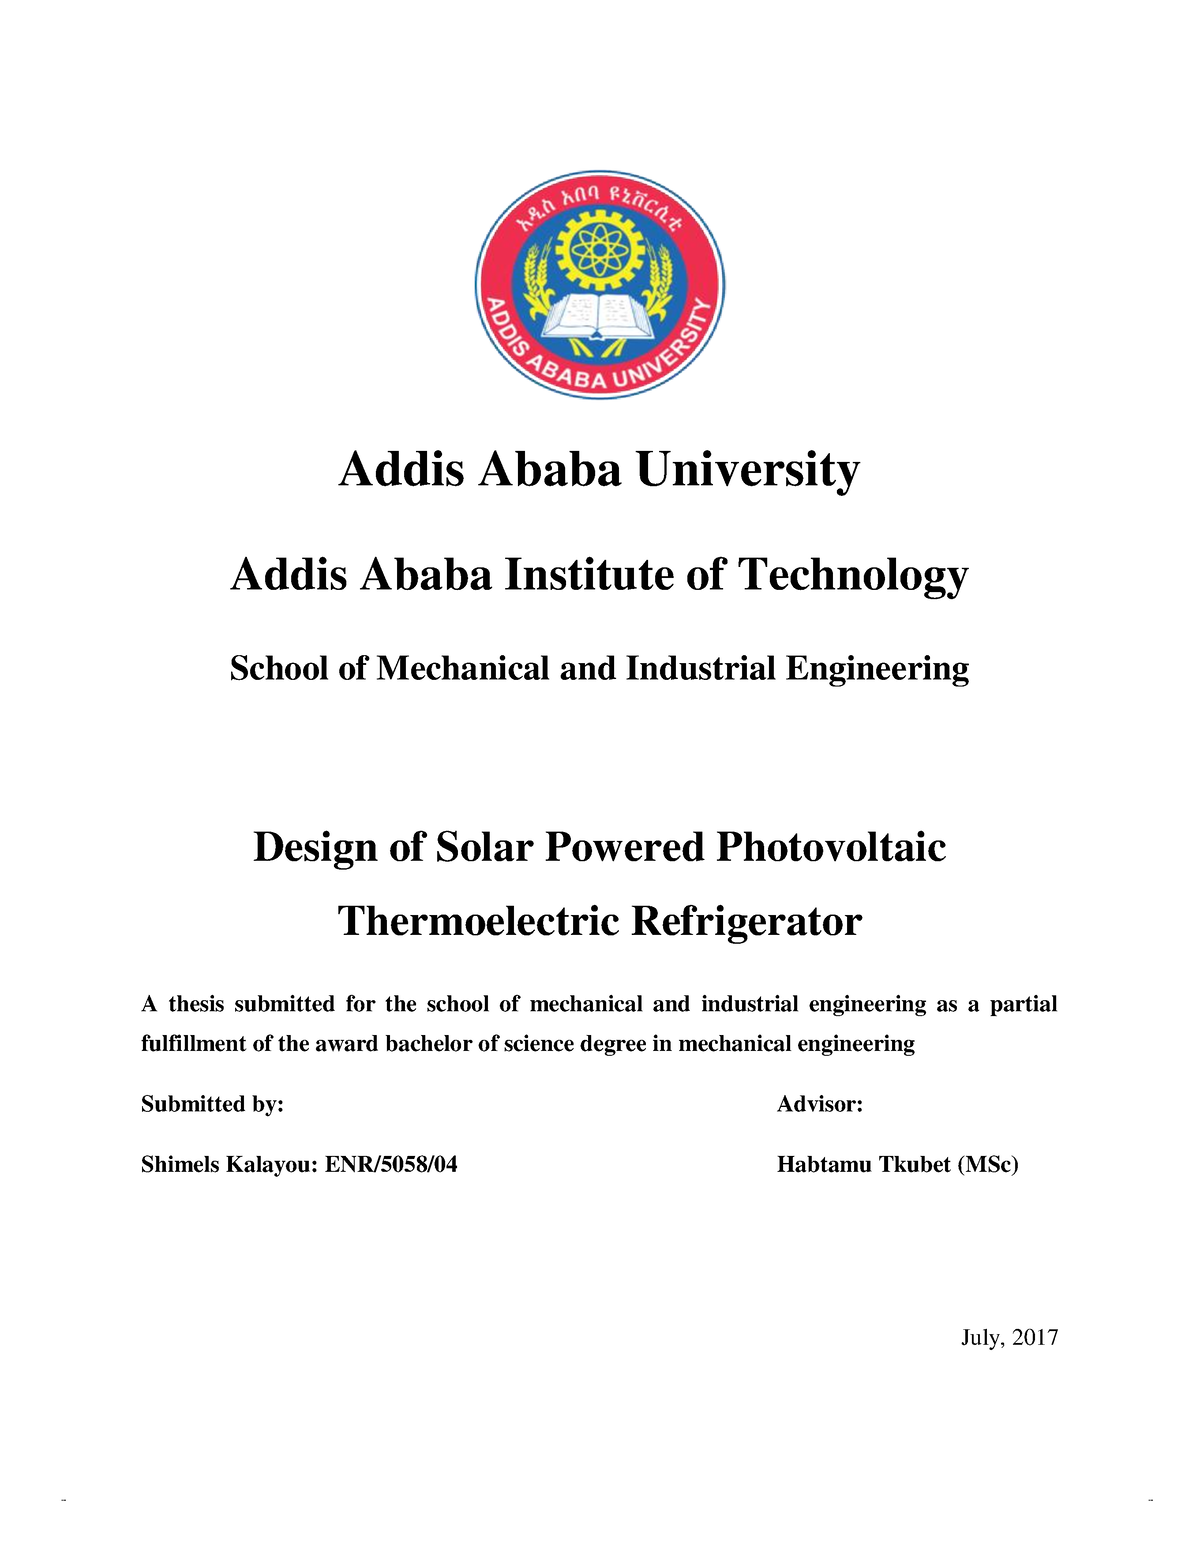 addis ababa university libraries electronic thesis and dissertations database